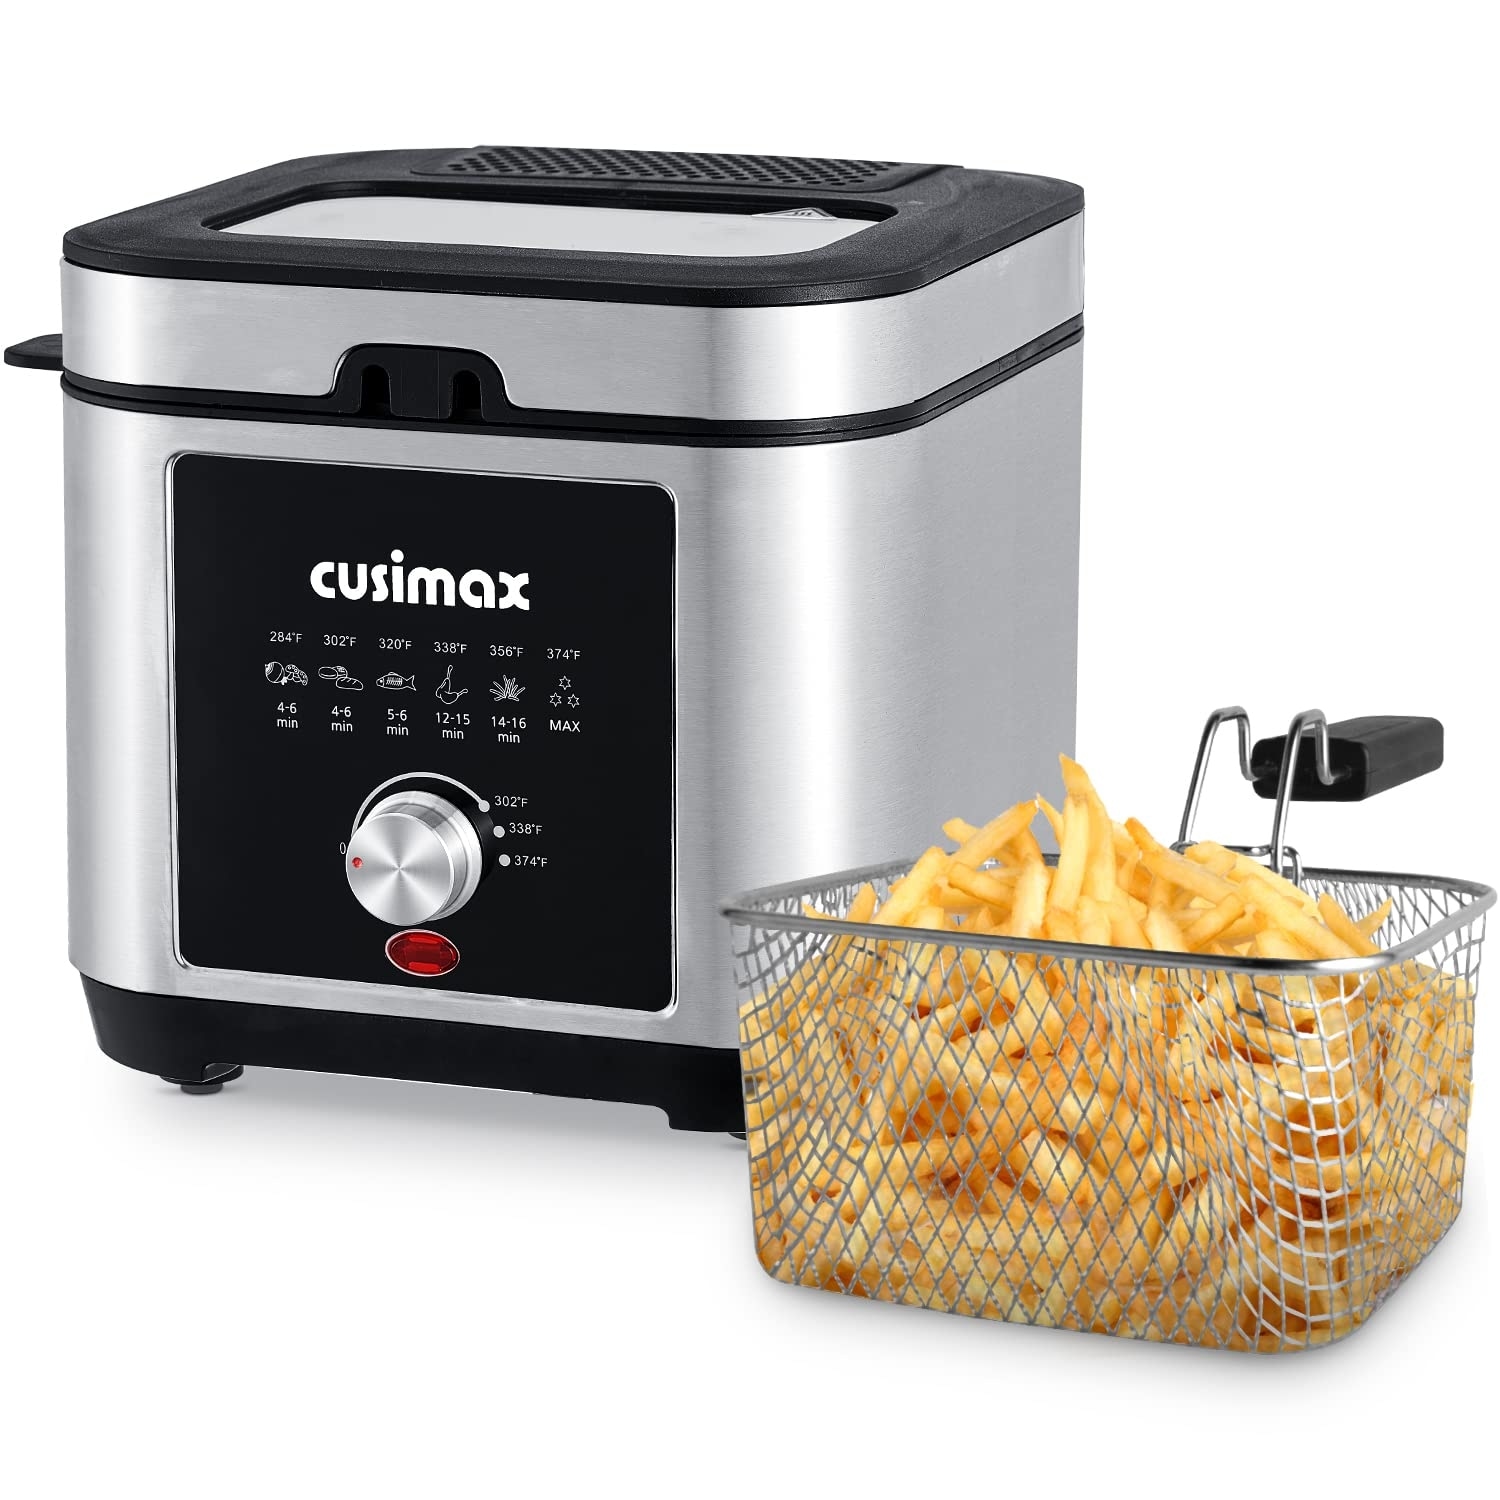 https://ak1.ostkcdn.com/images/products/is/images/direct/c1e4f3b7f13e9203994ff53076aed08de66953e4/Deep-Fryer-with-Basket%2C-2.6Qt-1200W-Electric-Deep-Fryer%2C-with-Drip-Hook%2C-Removable-Lid%2C-View-Window-and-Oil-Filtration.jpg